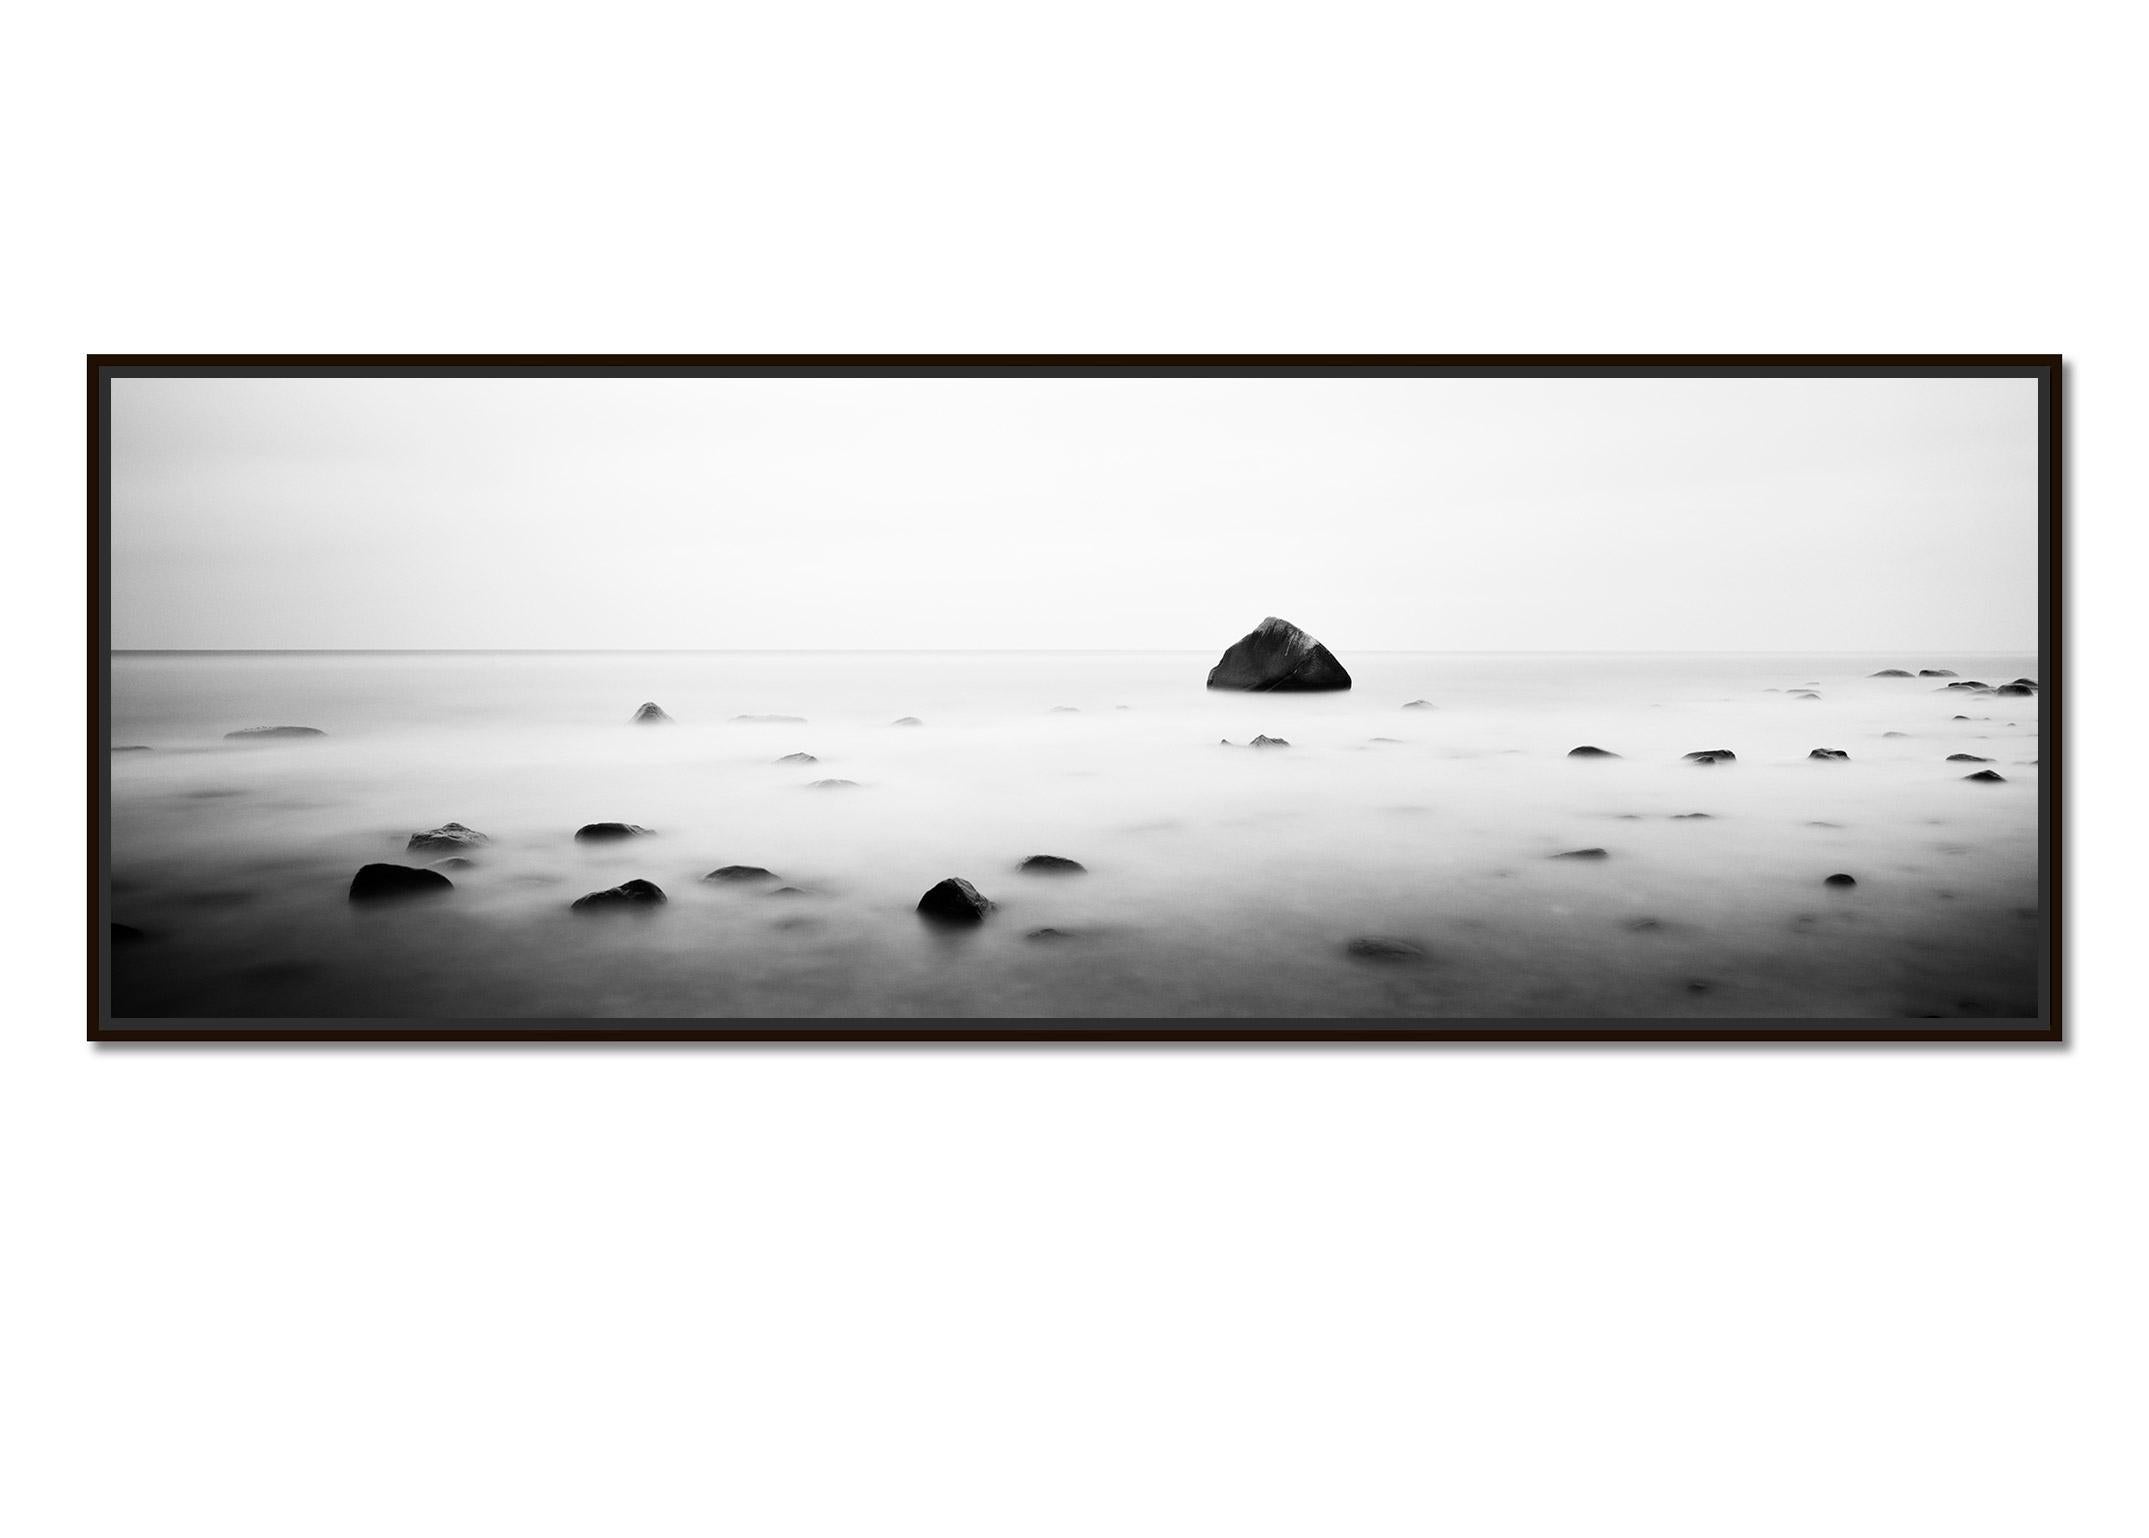 Glacial Erratic Schwanenstein Germany black white art waterscape photography - Photograph by Gerald Berghammer